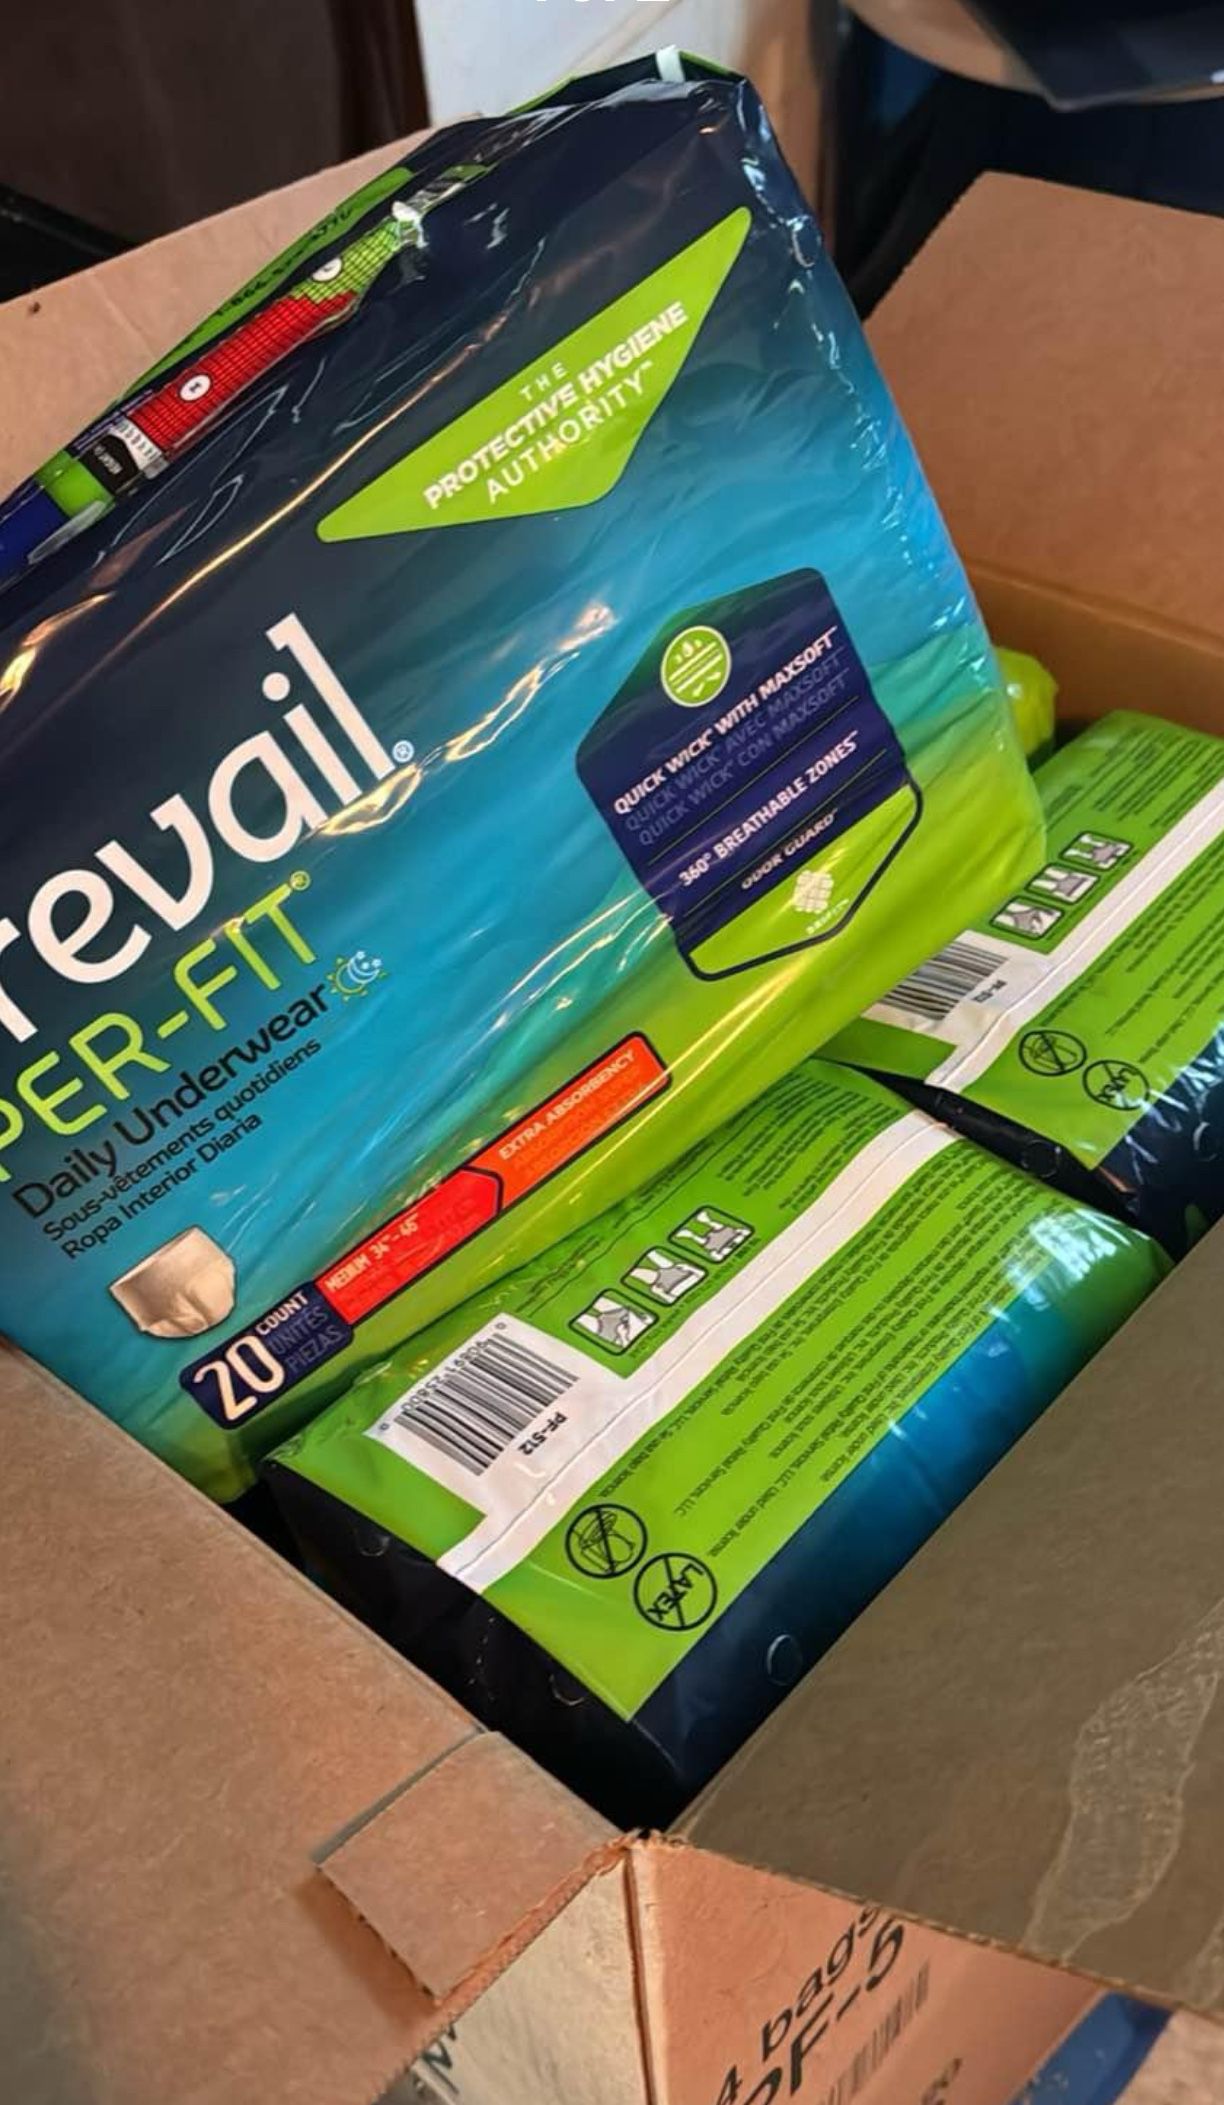 Prevails Adult Diapers